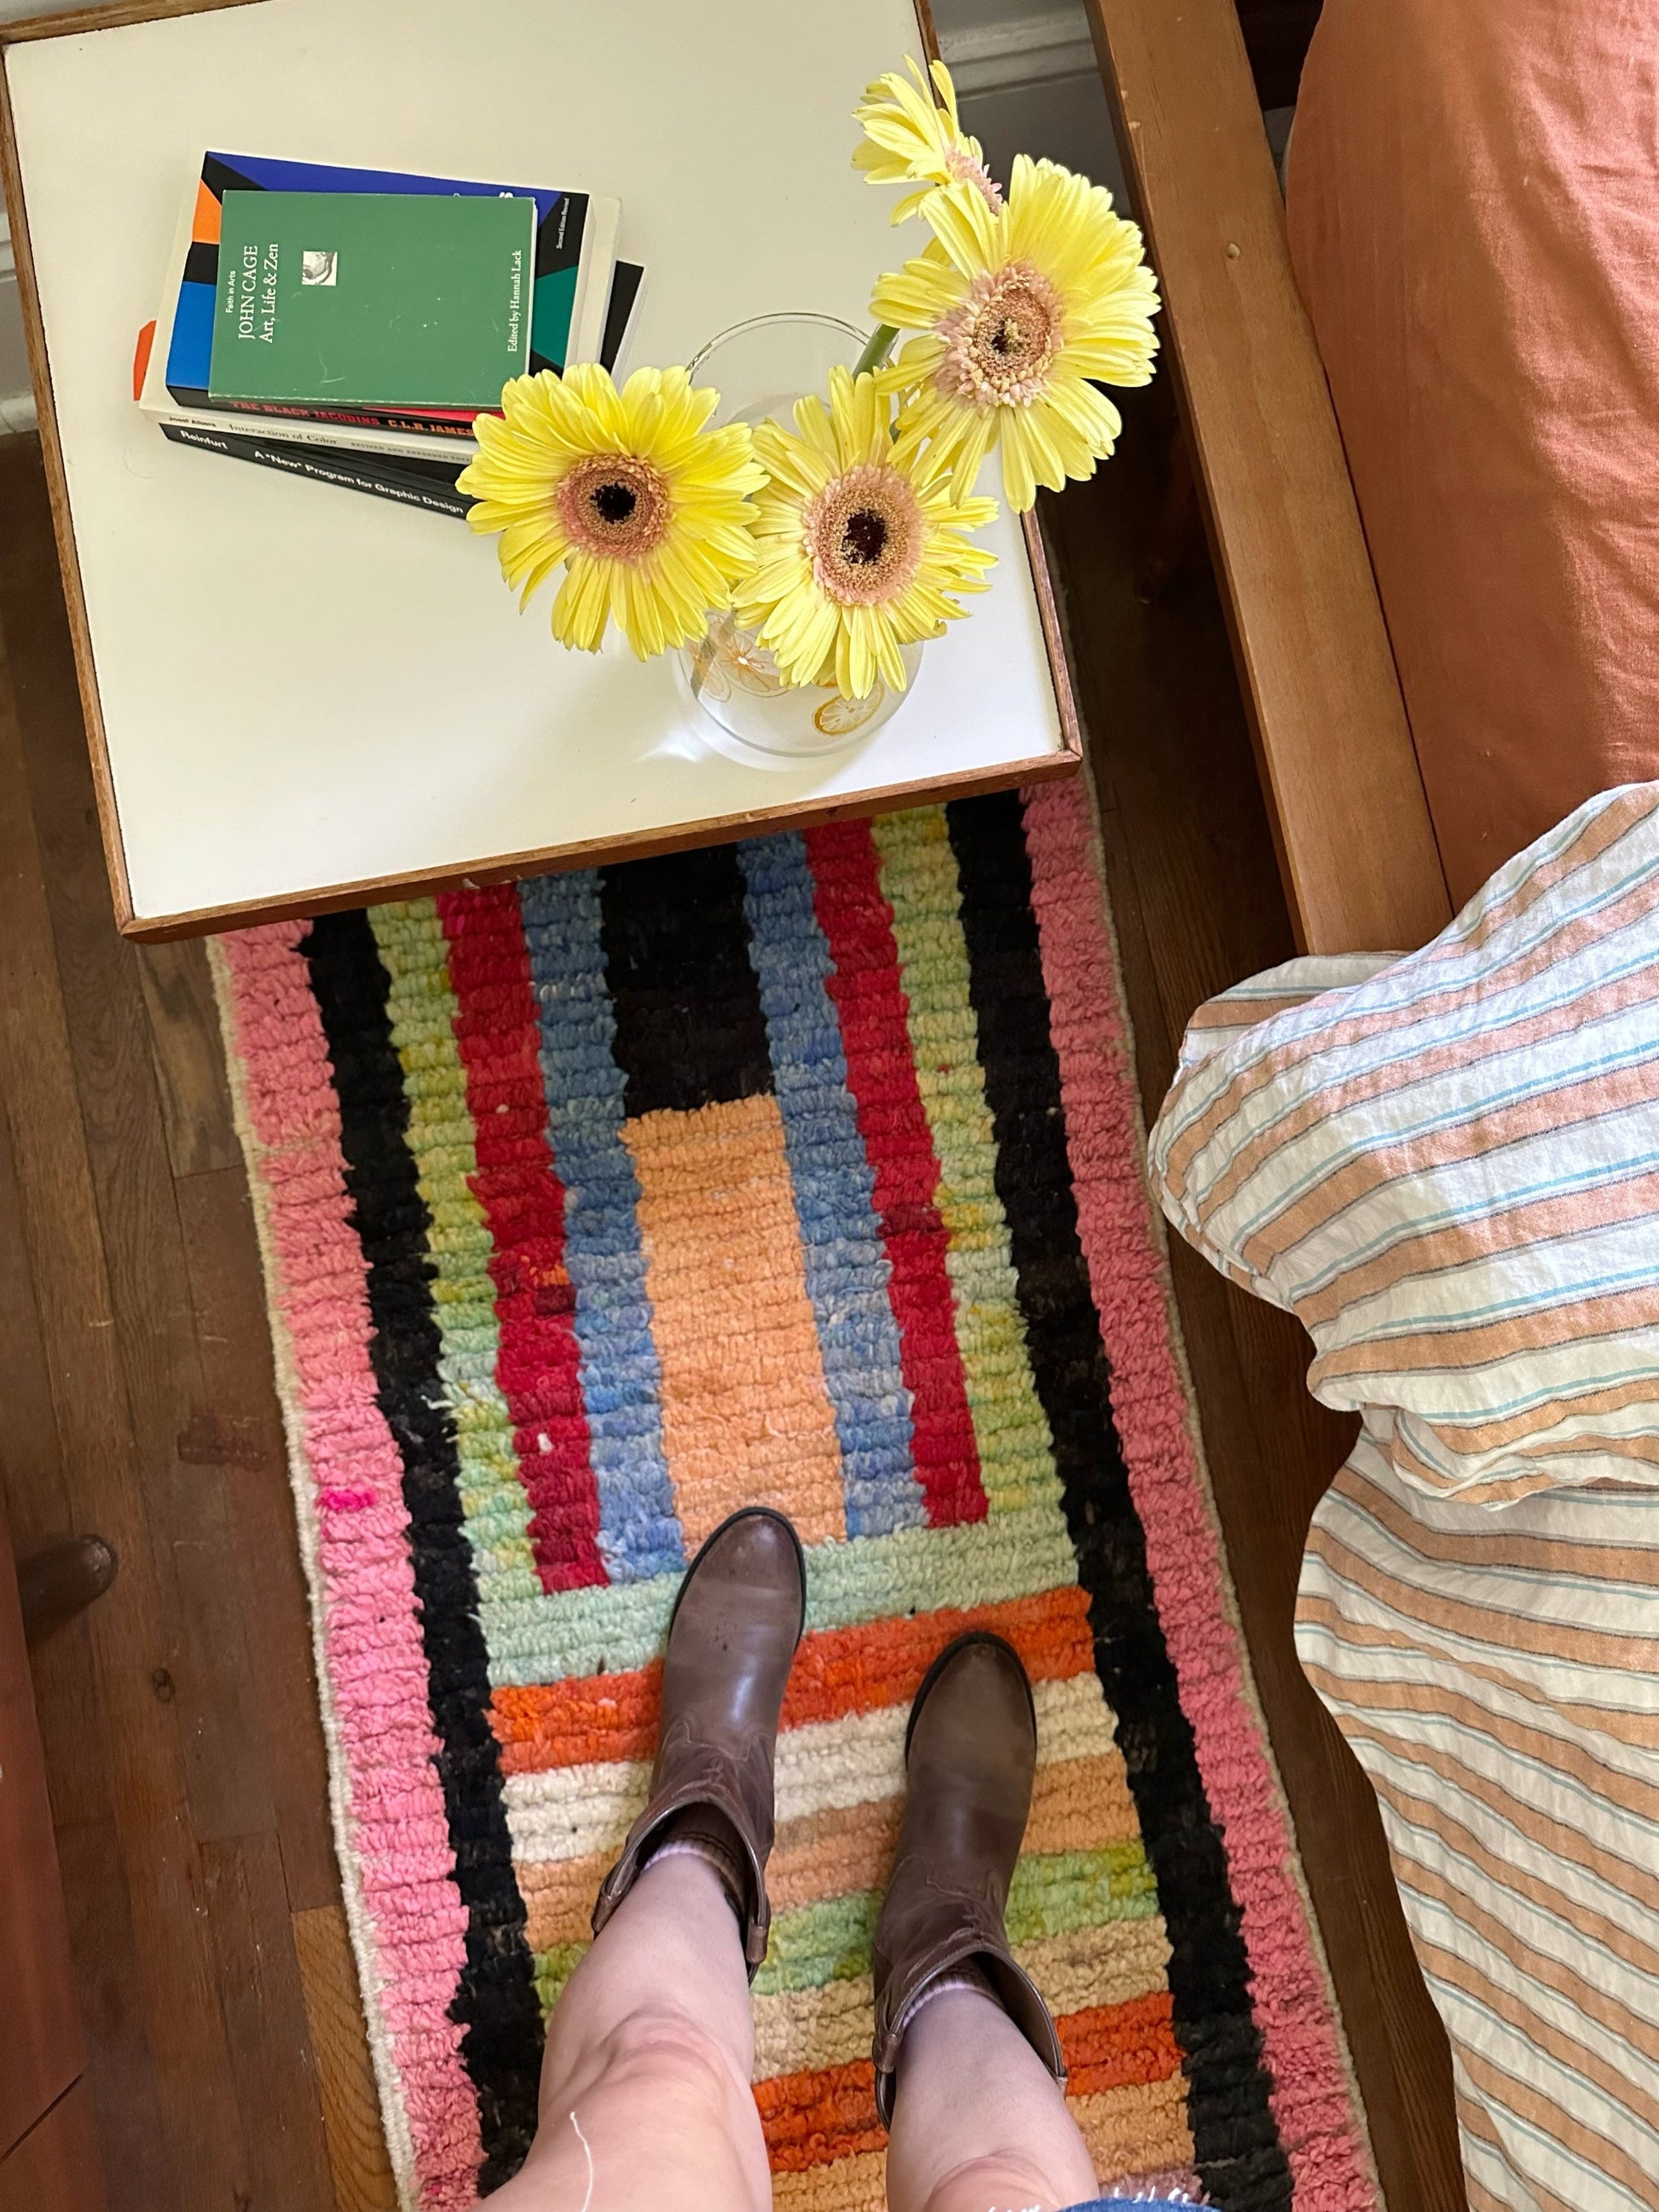 Cotta Moroccan Runner goes perfectly with yellow daisies